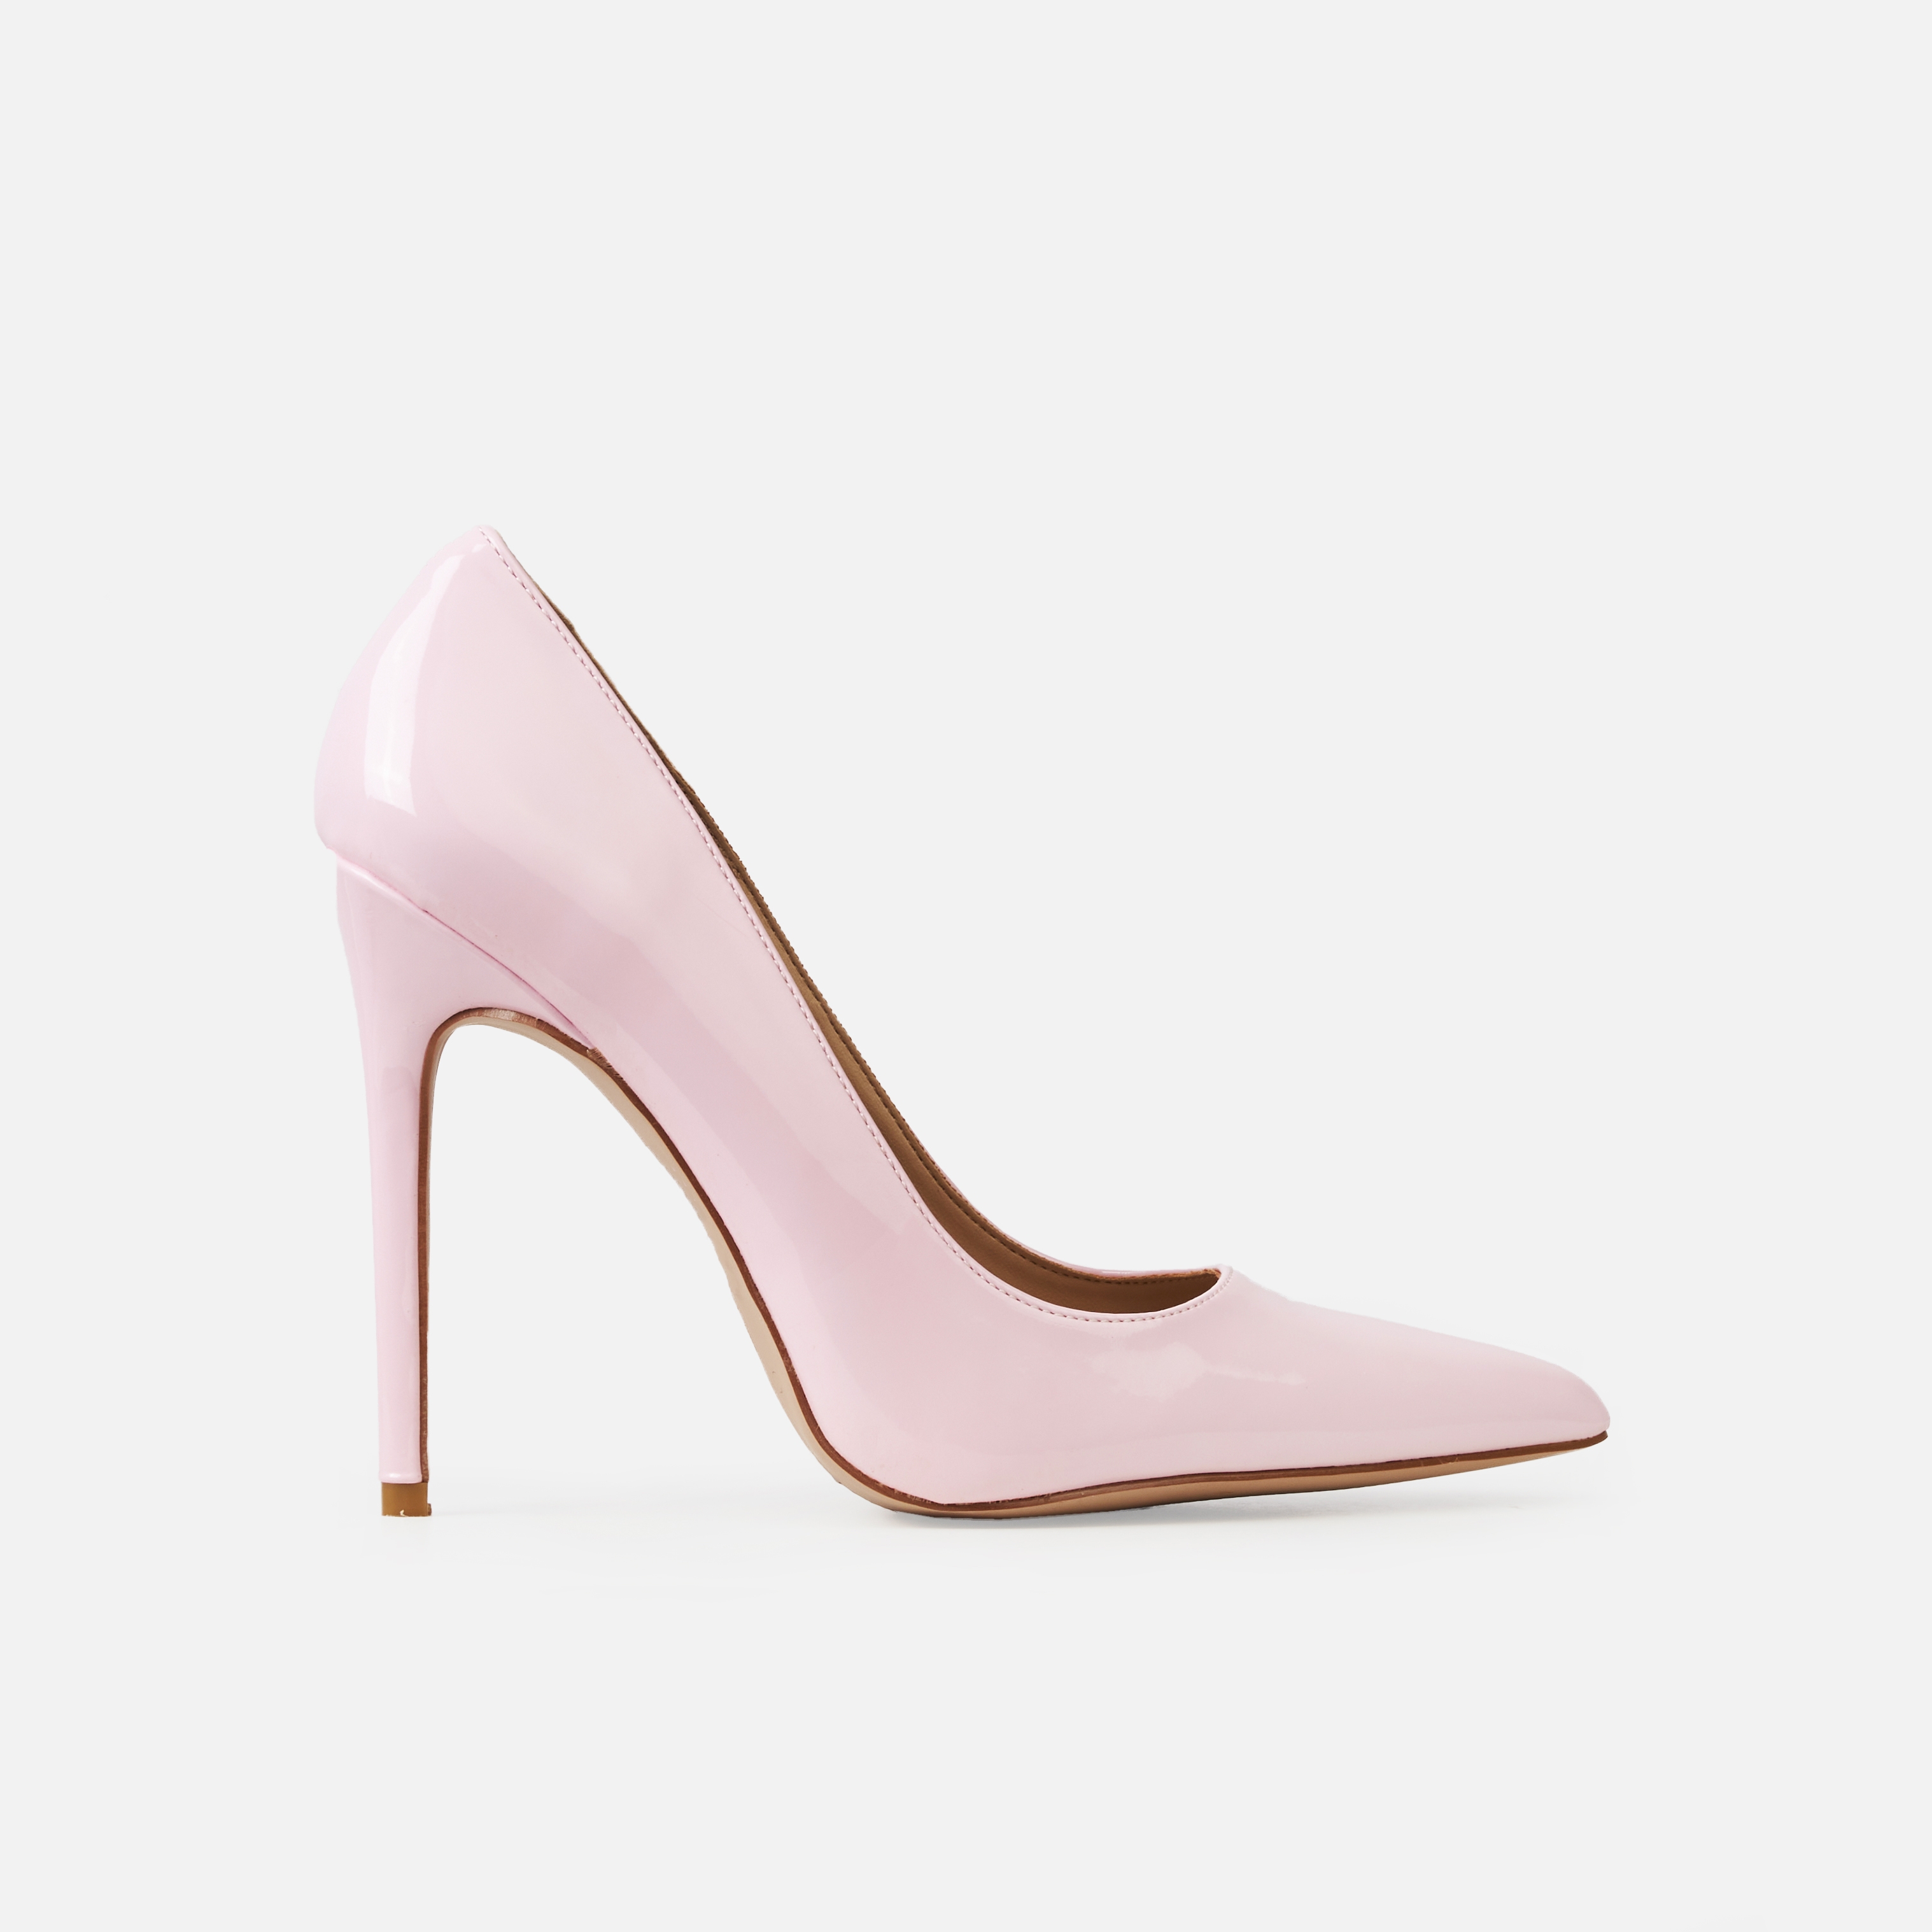 Chic Pink Patent Leather Heels : Cowhide Leather Glittery Pointy Toe H